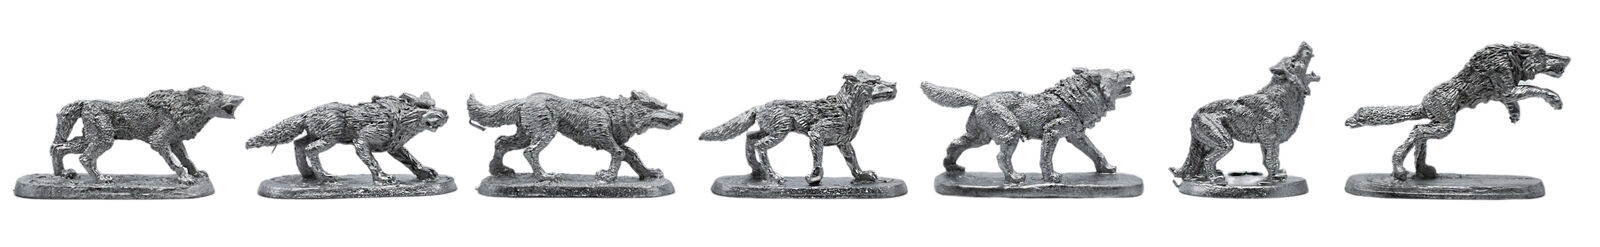 7 Piece Wolf Pack Set - 100% Lead-Free Pewter - Classic Fantasy Miniatures for